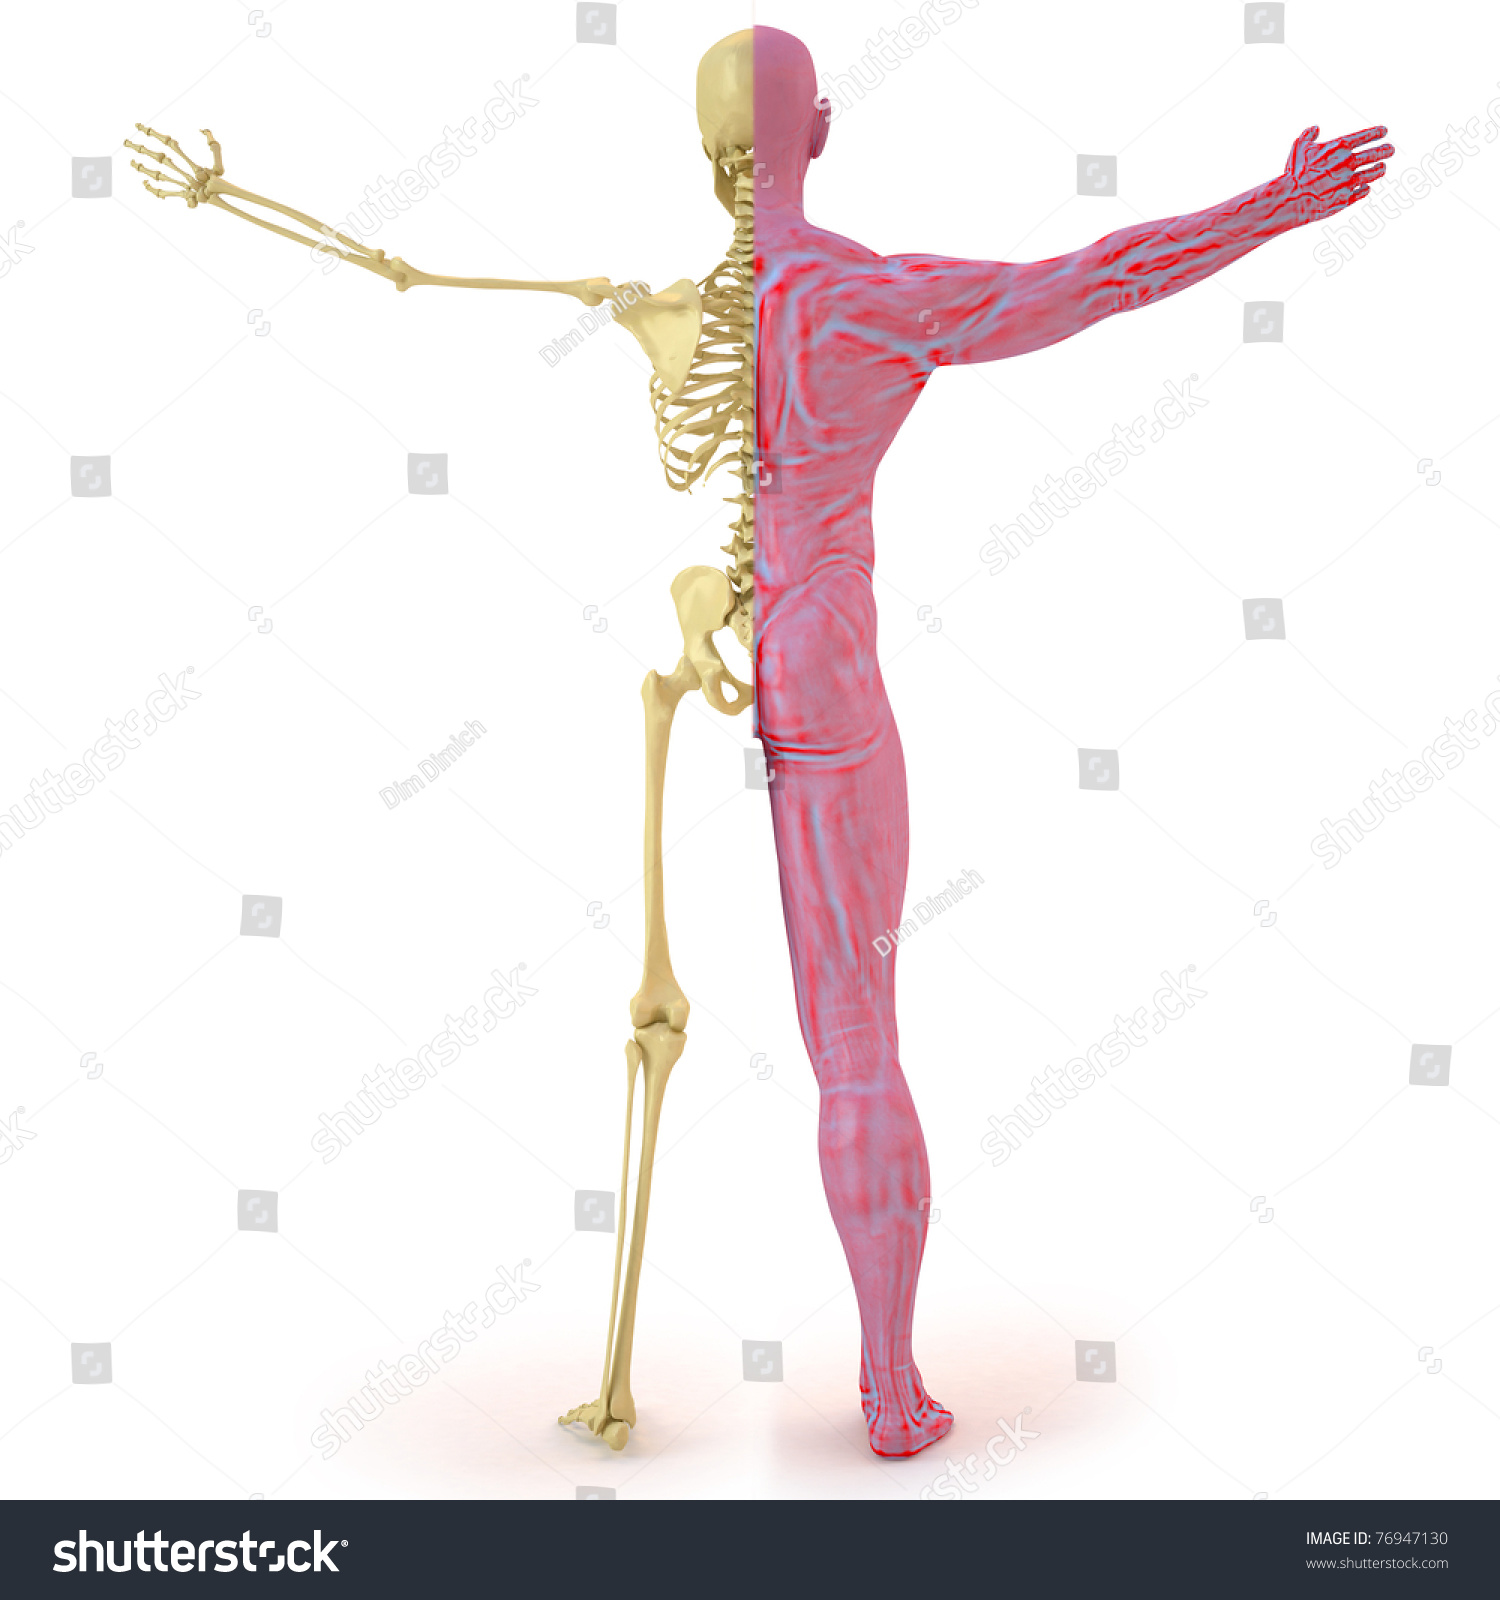 Anatomical Structure Of The Body Man. Bones And Muscular Flesh